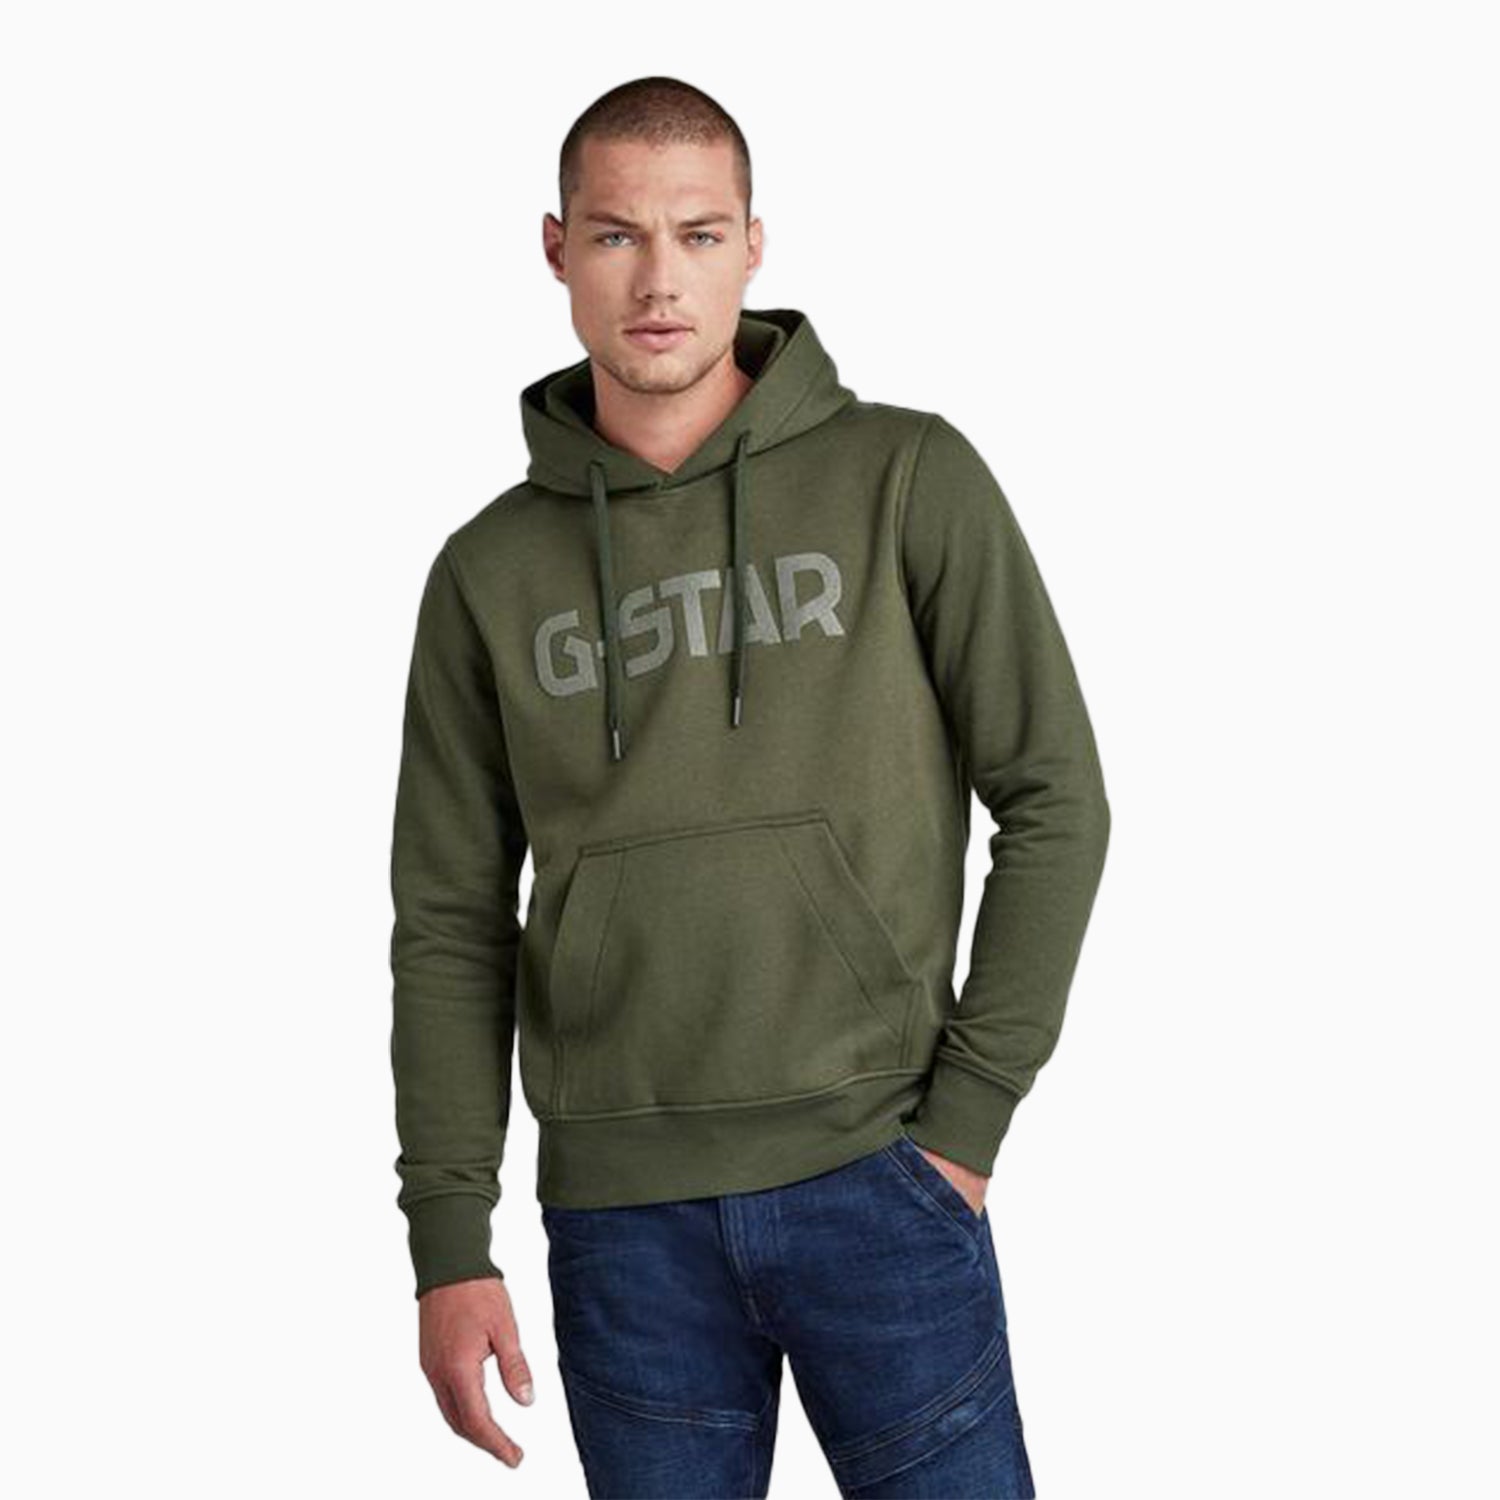 g-star-raw-mens-g-star-logo-pull-over-hoodie-d20508-a971-6059